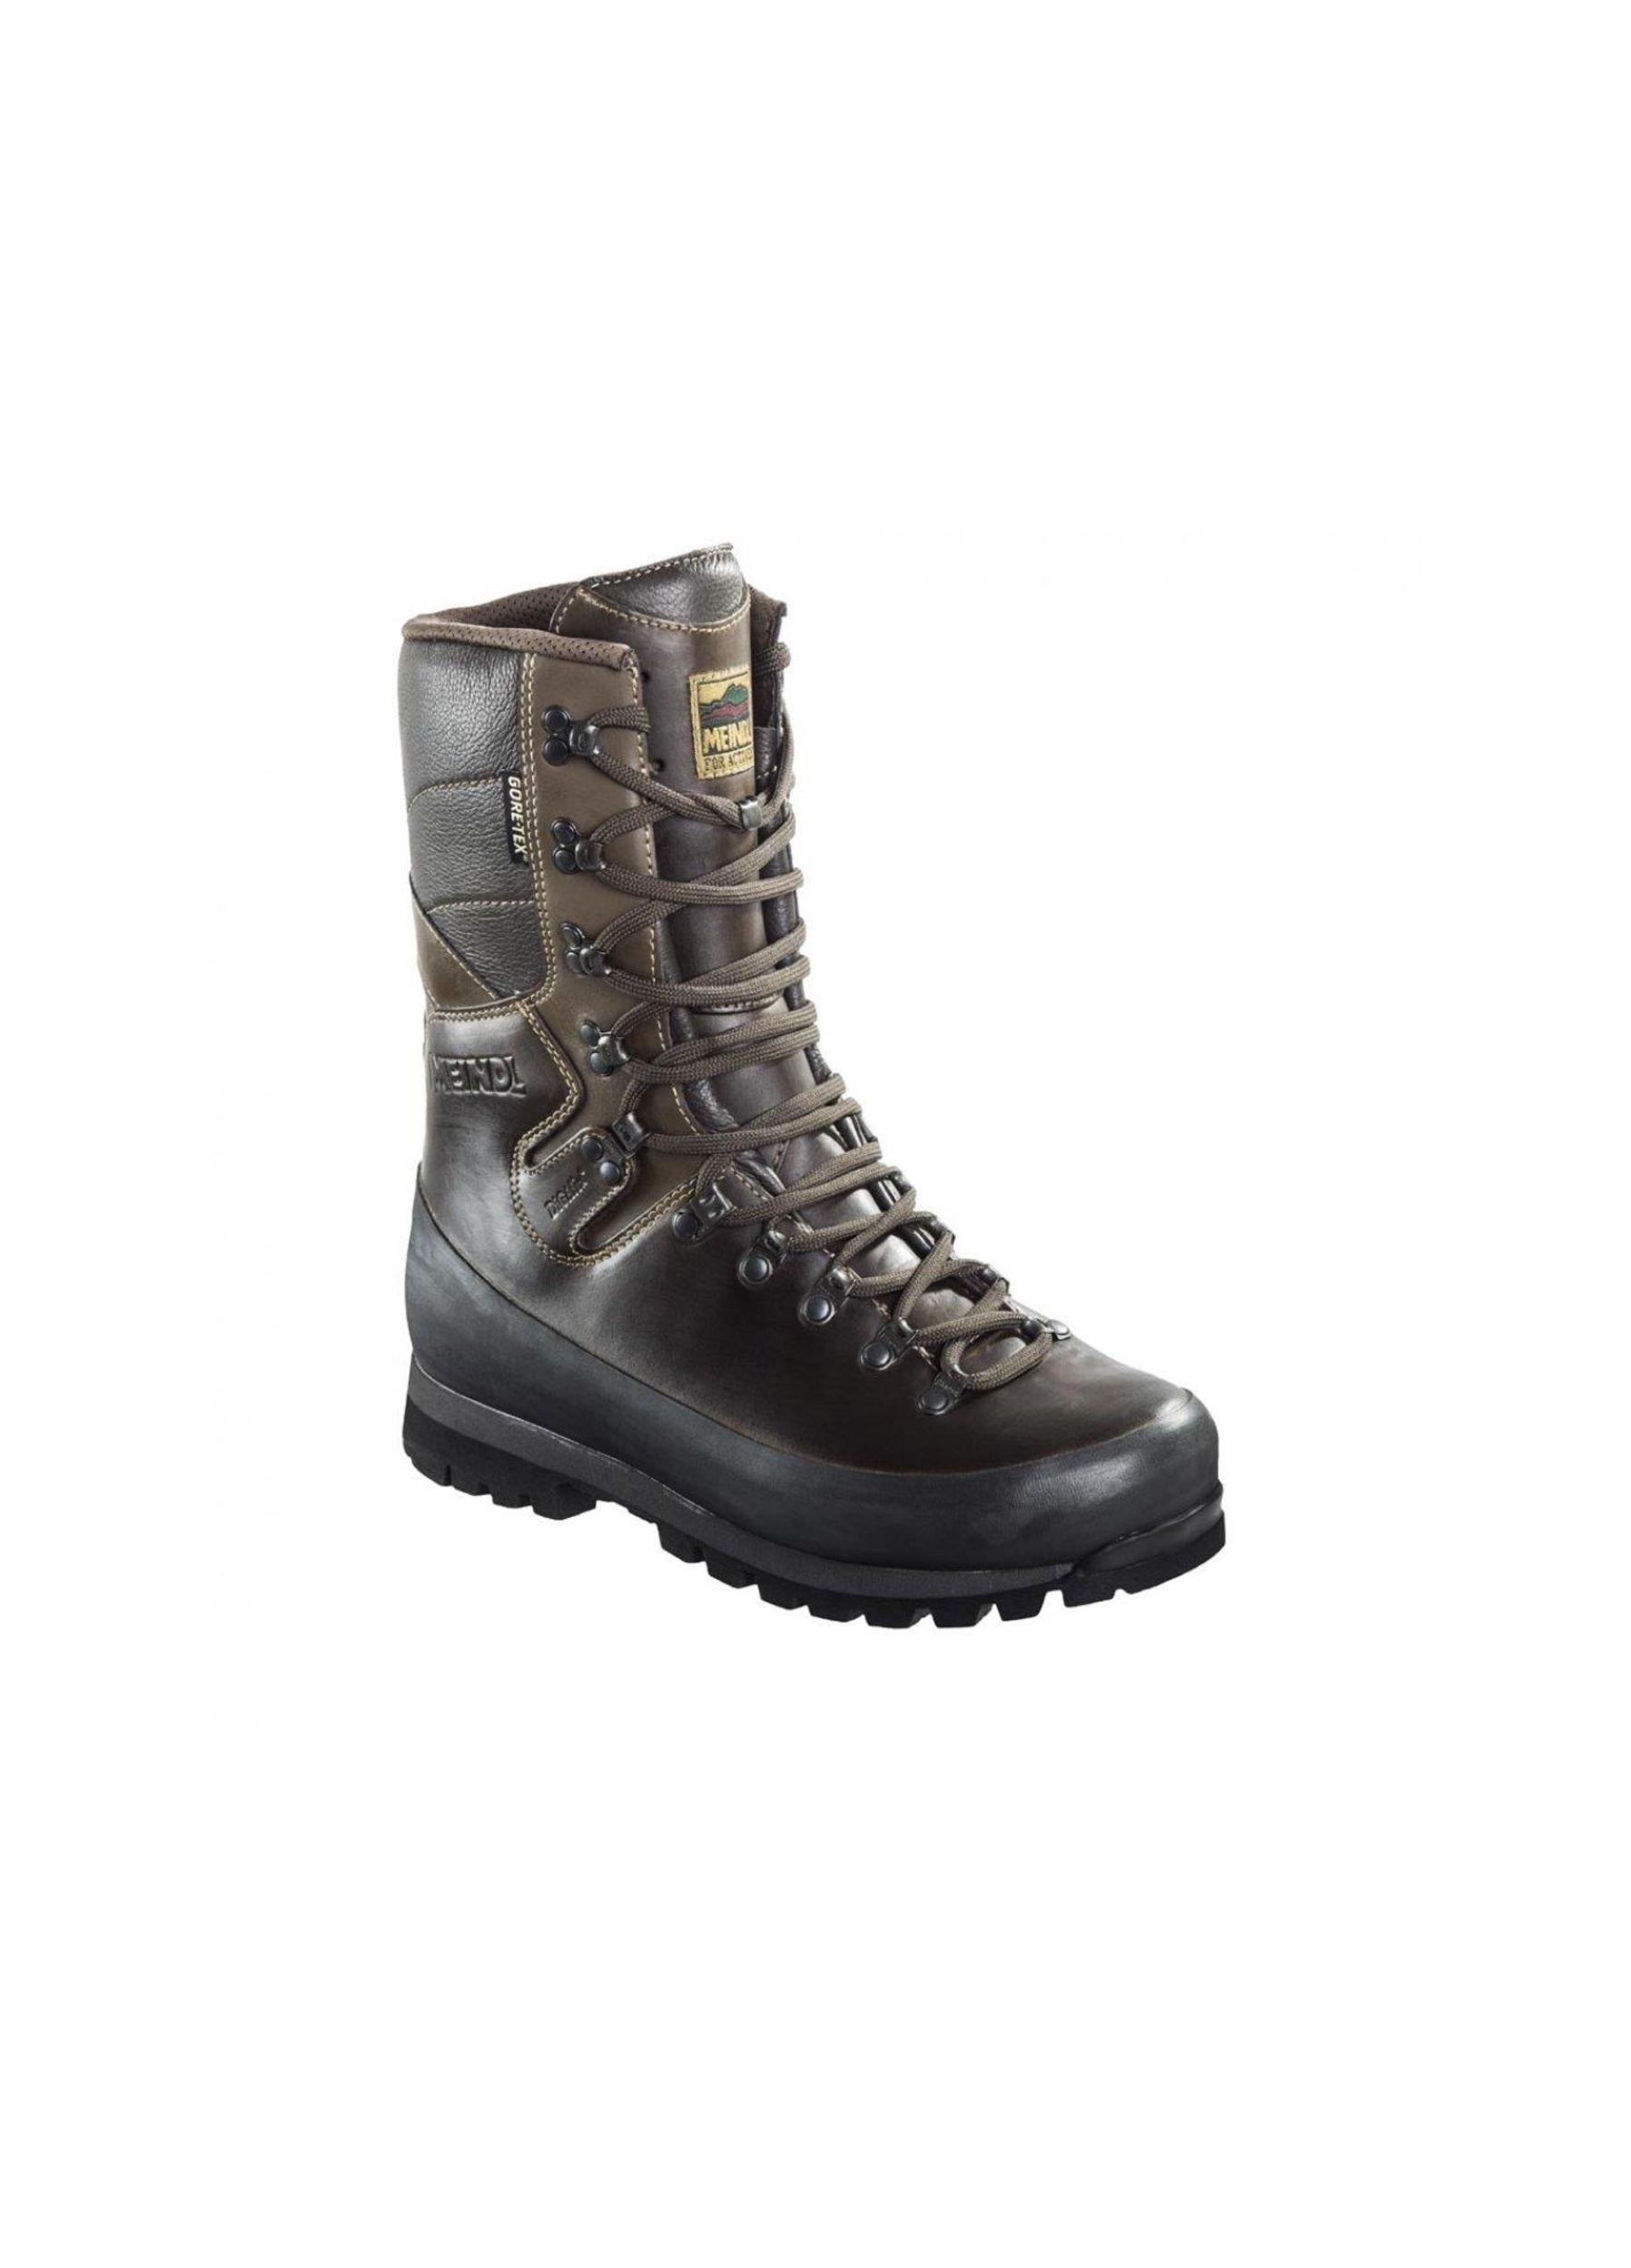 Meindl Unisex Dovre Extreme Wide Field Sports Boot